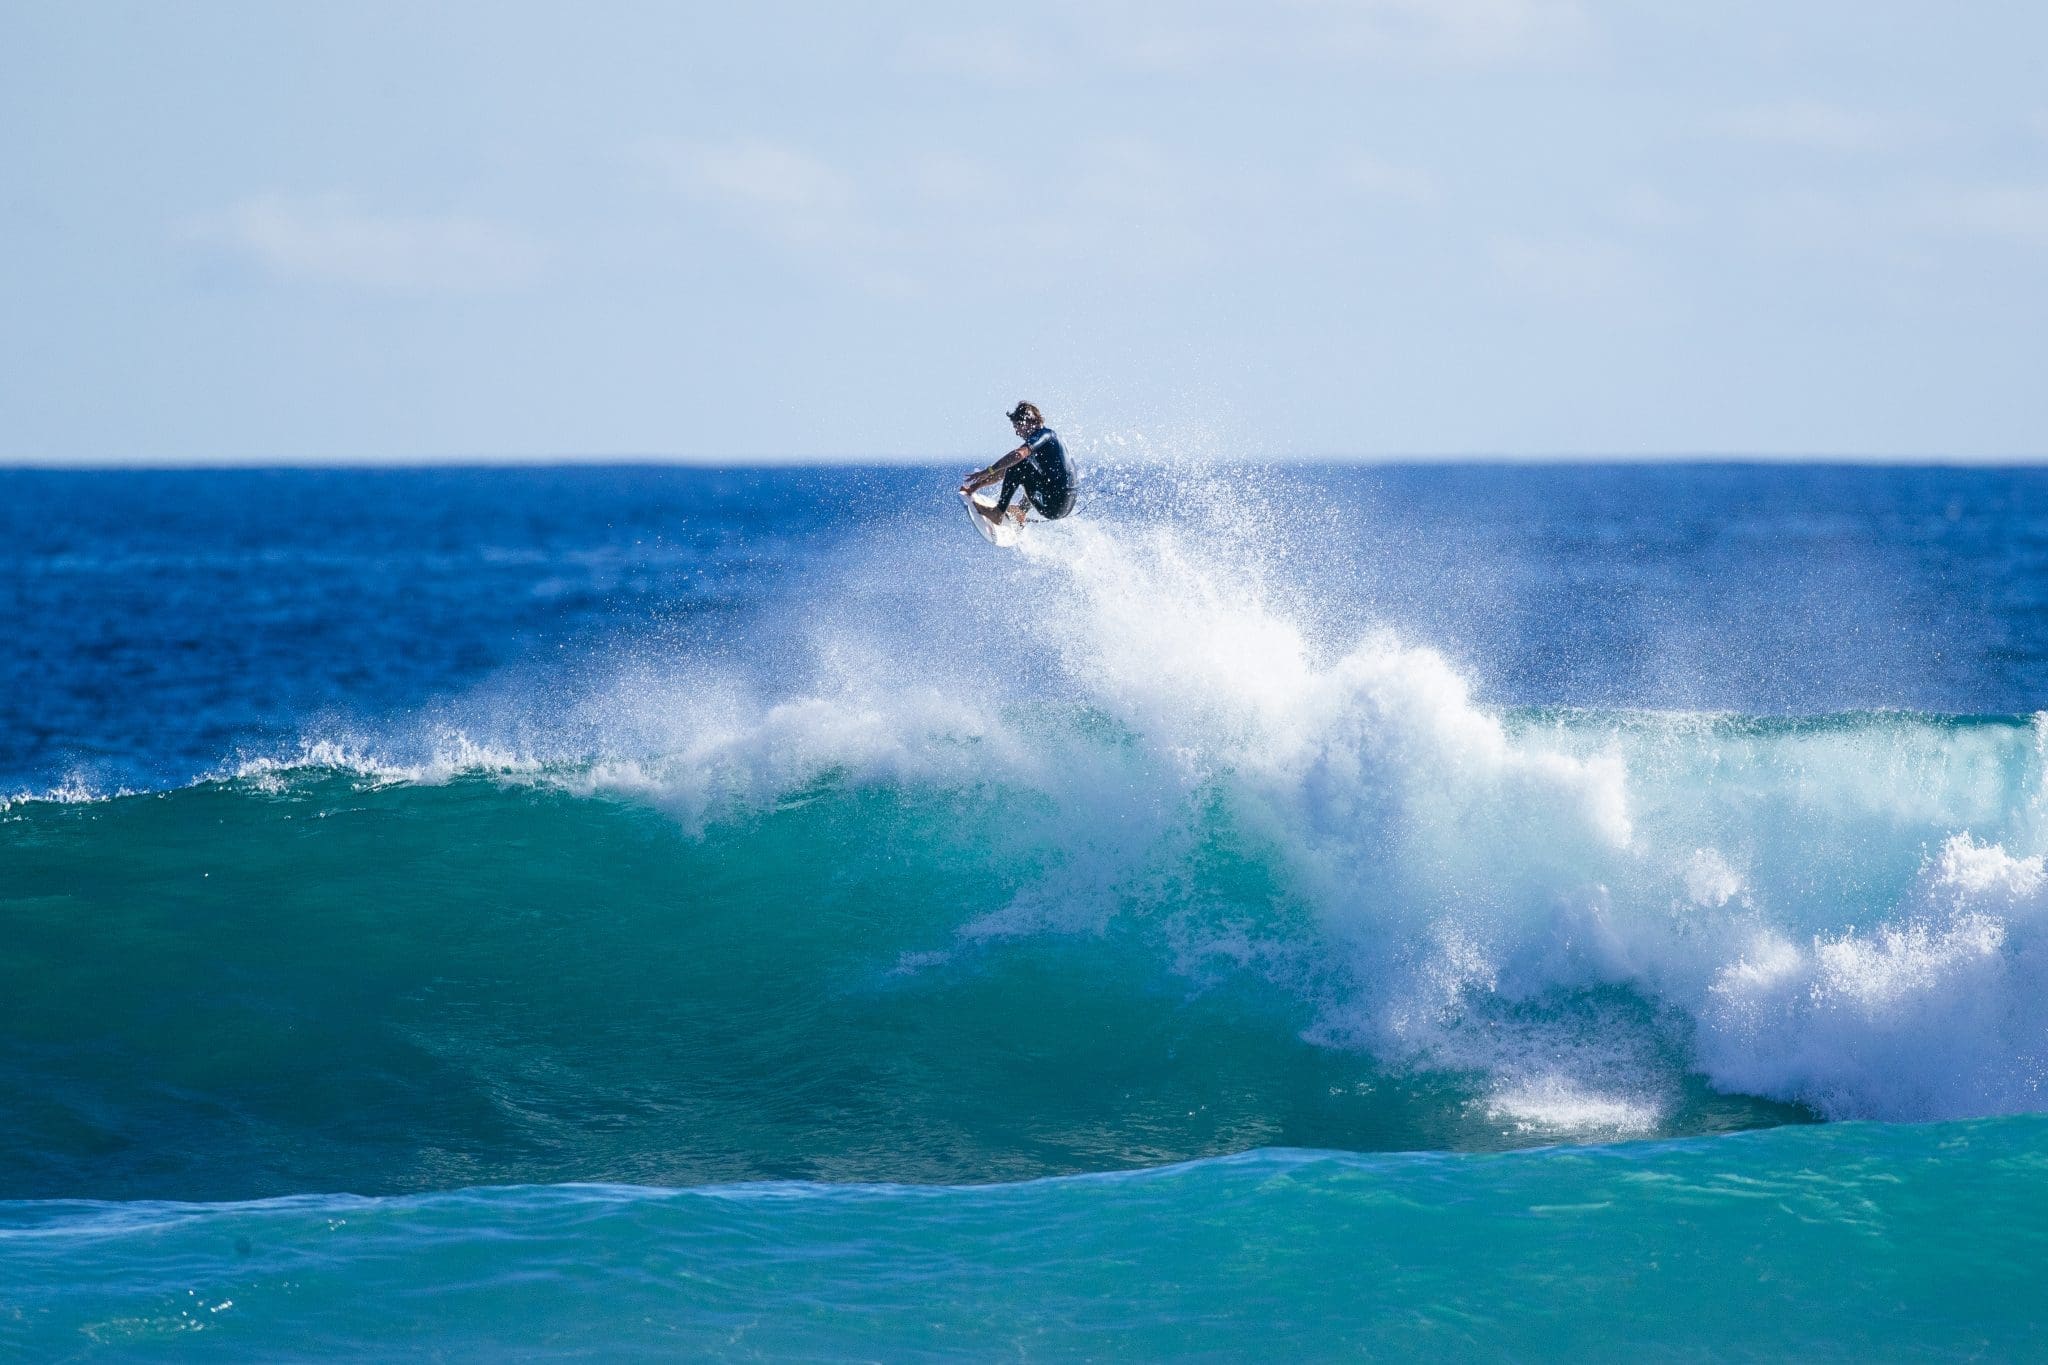 Jack Robinson's Air in the WSL Margaret River Pro Finals